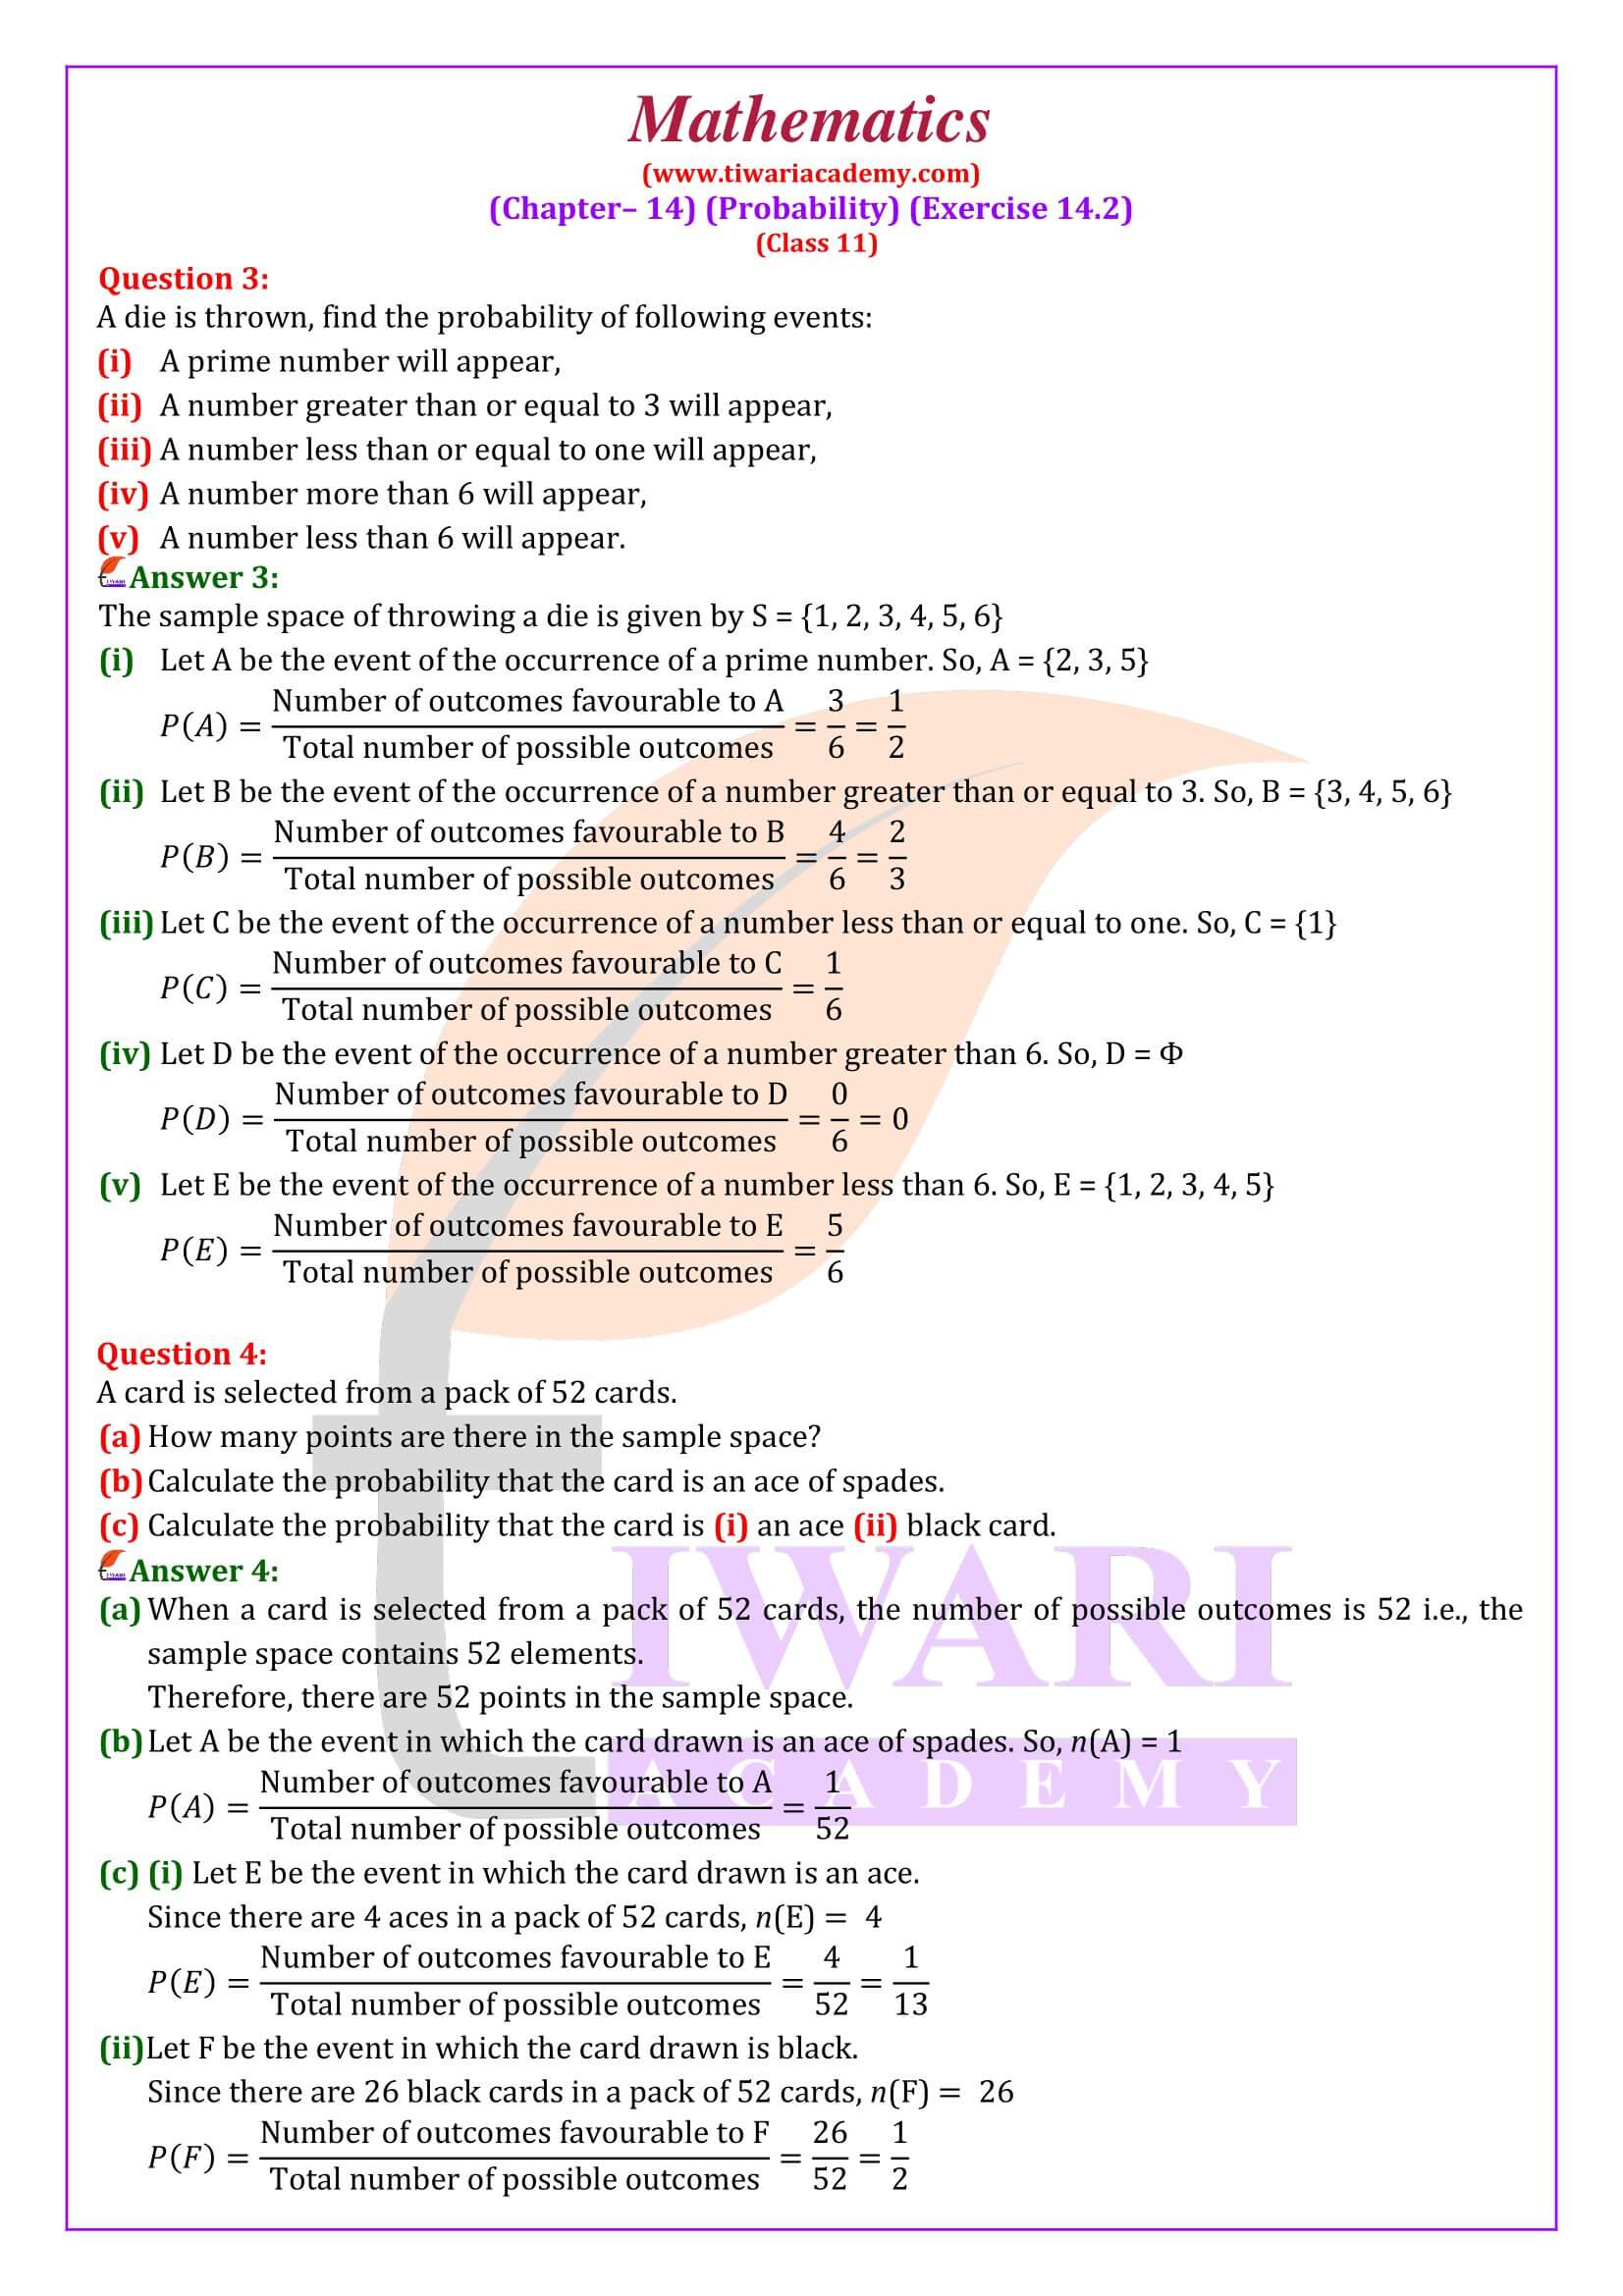 NCERT Solutions for Class 11 Maths Chapter 14 Exercise 14.2 revised for new session